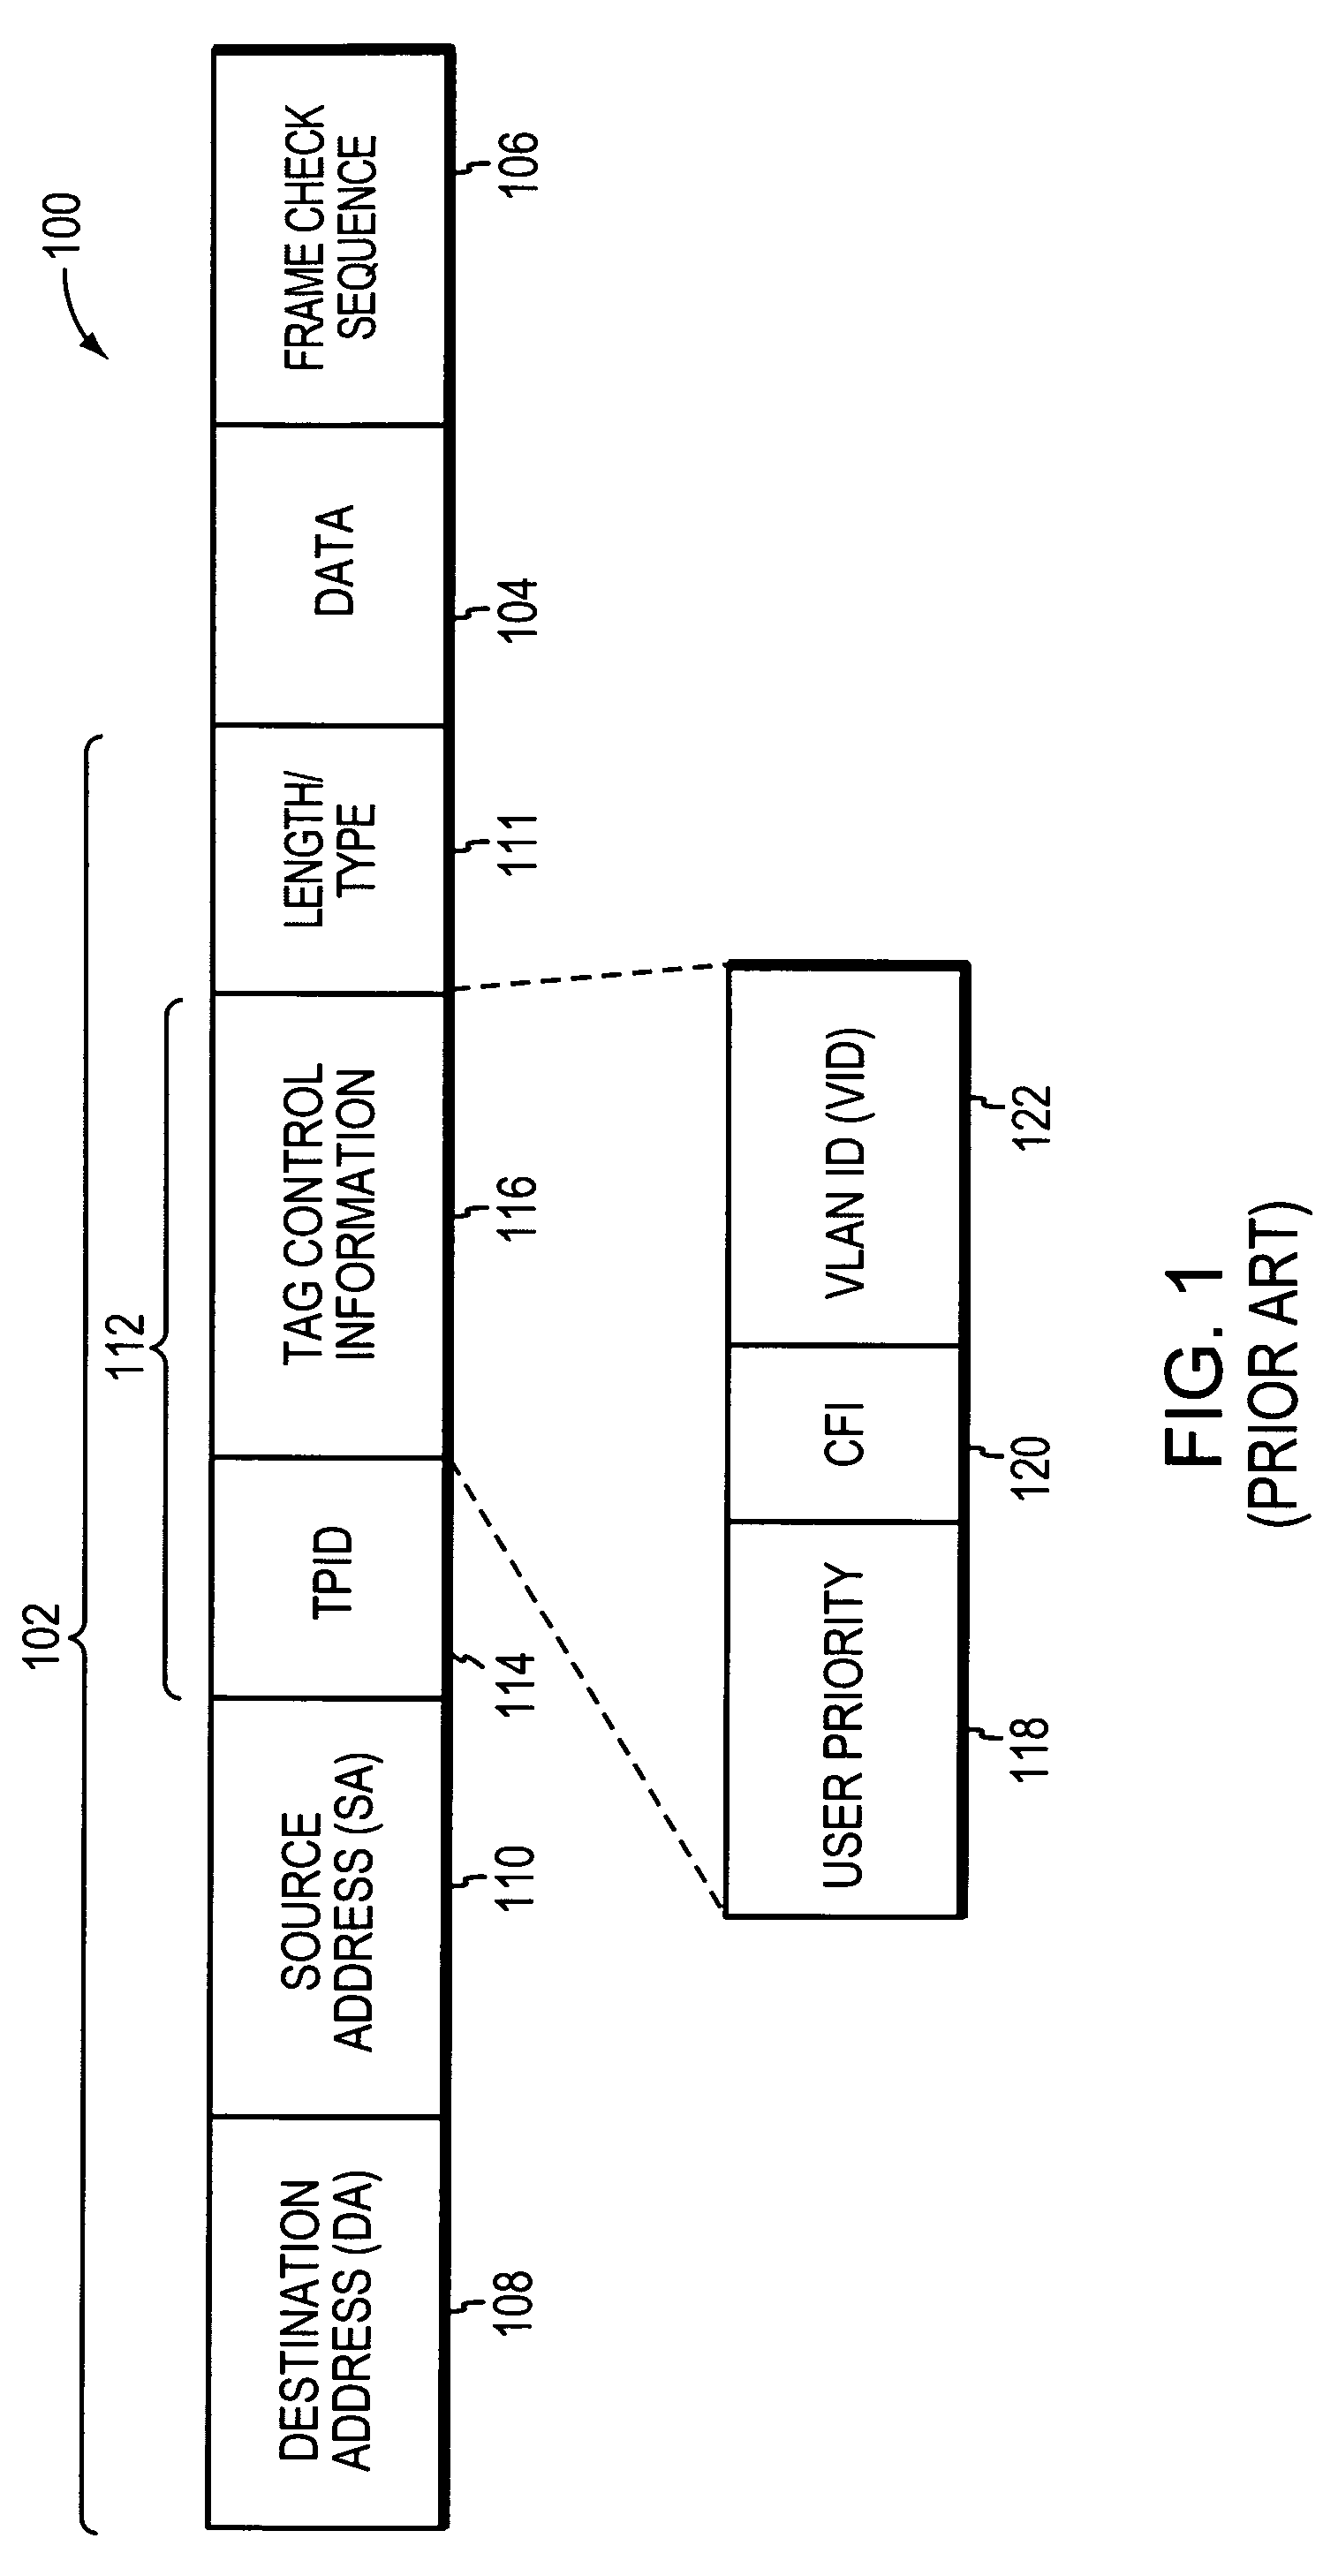 Multi-tiered virtual local area network (VLAN) domain mapping mechanism